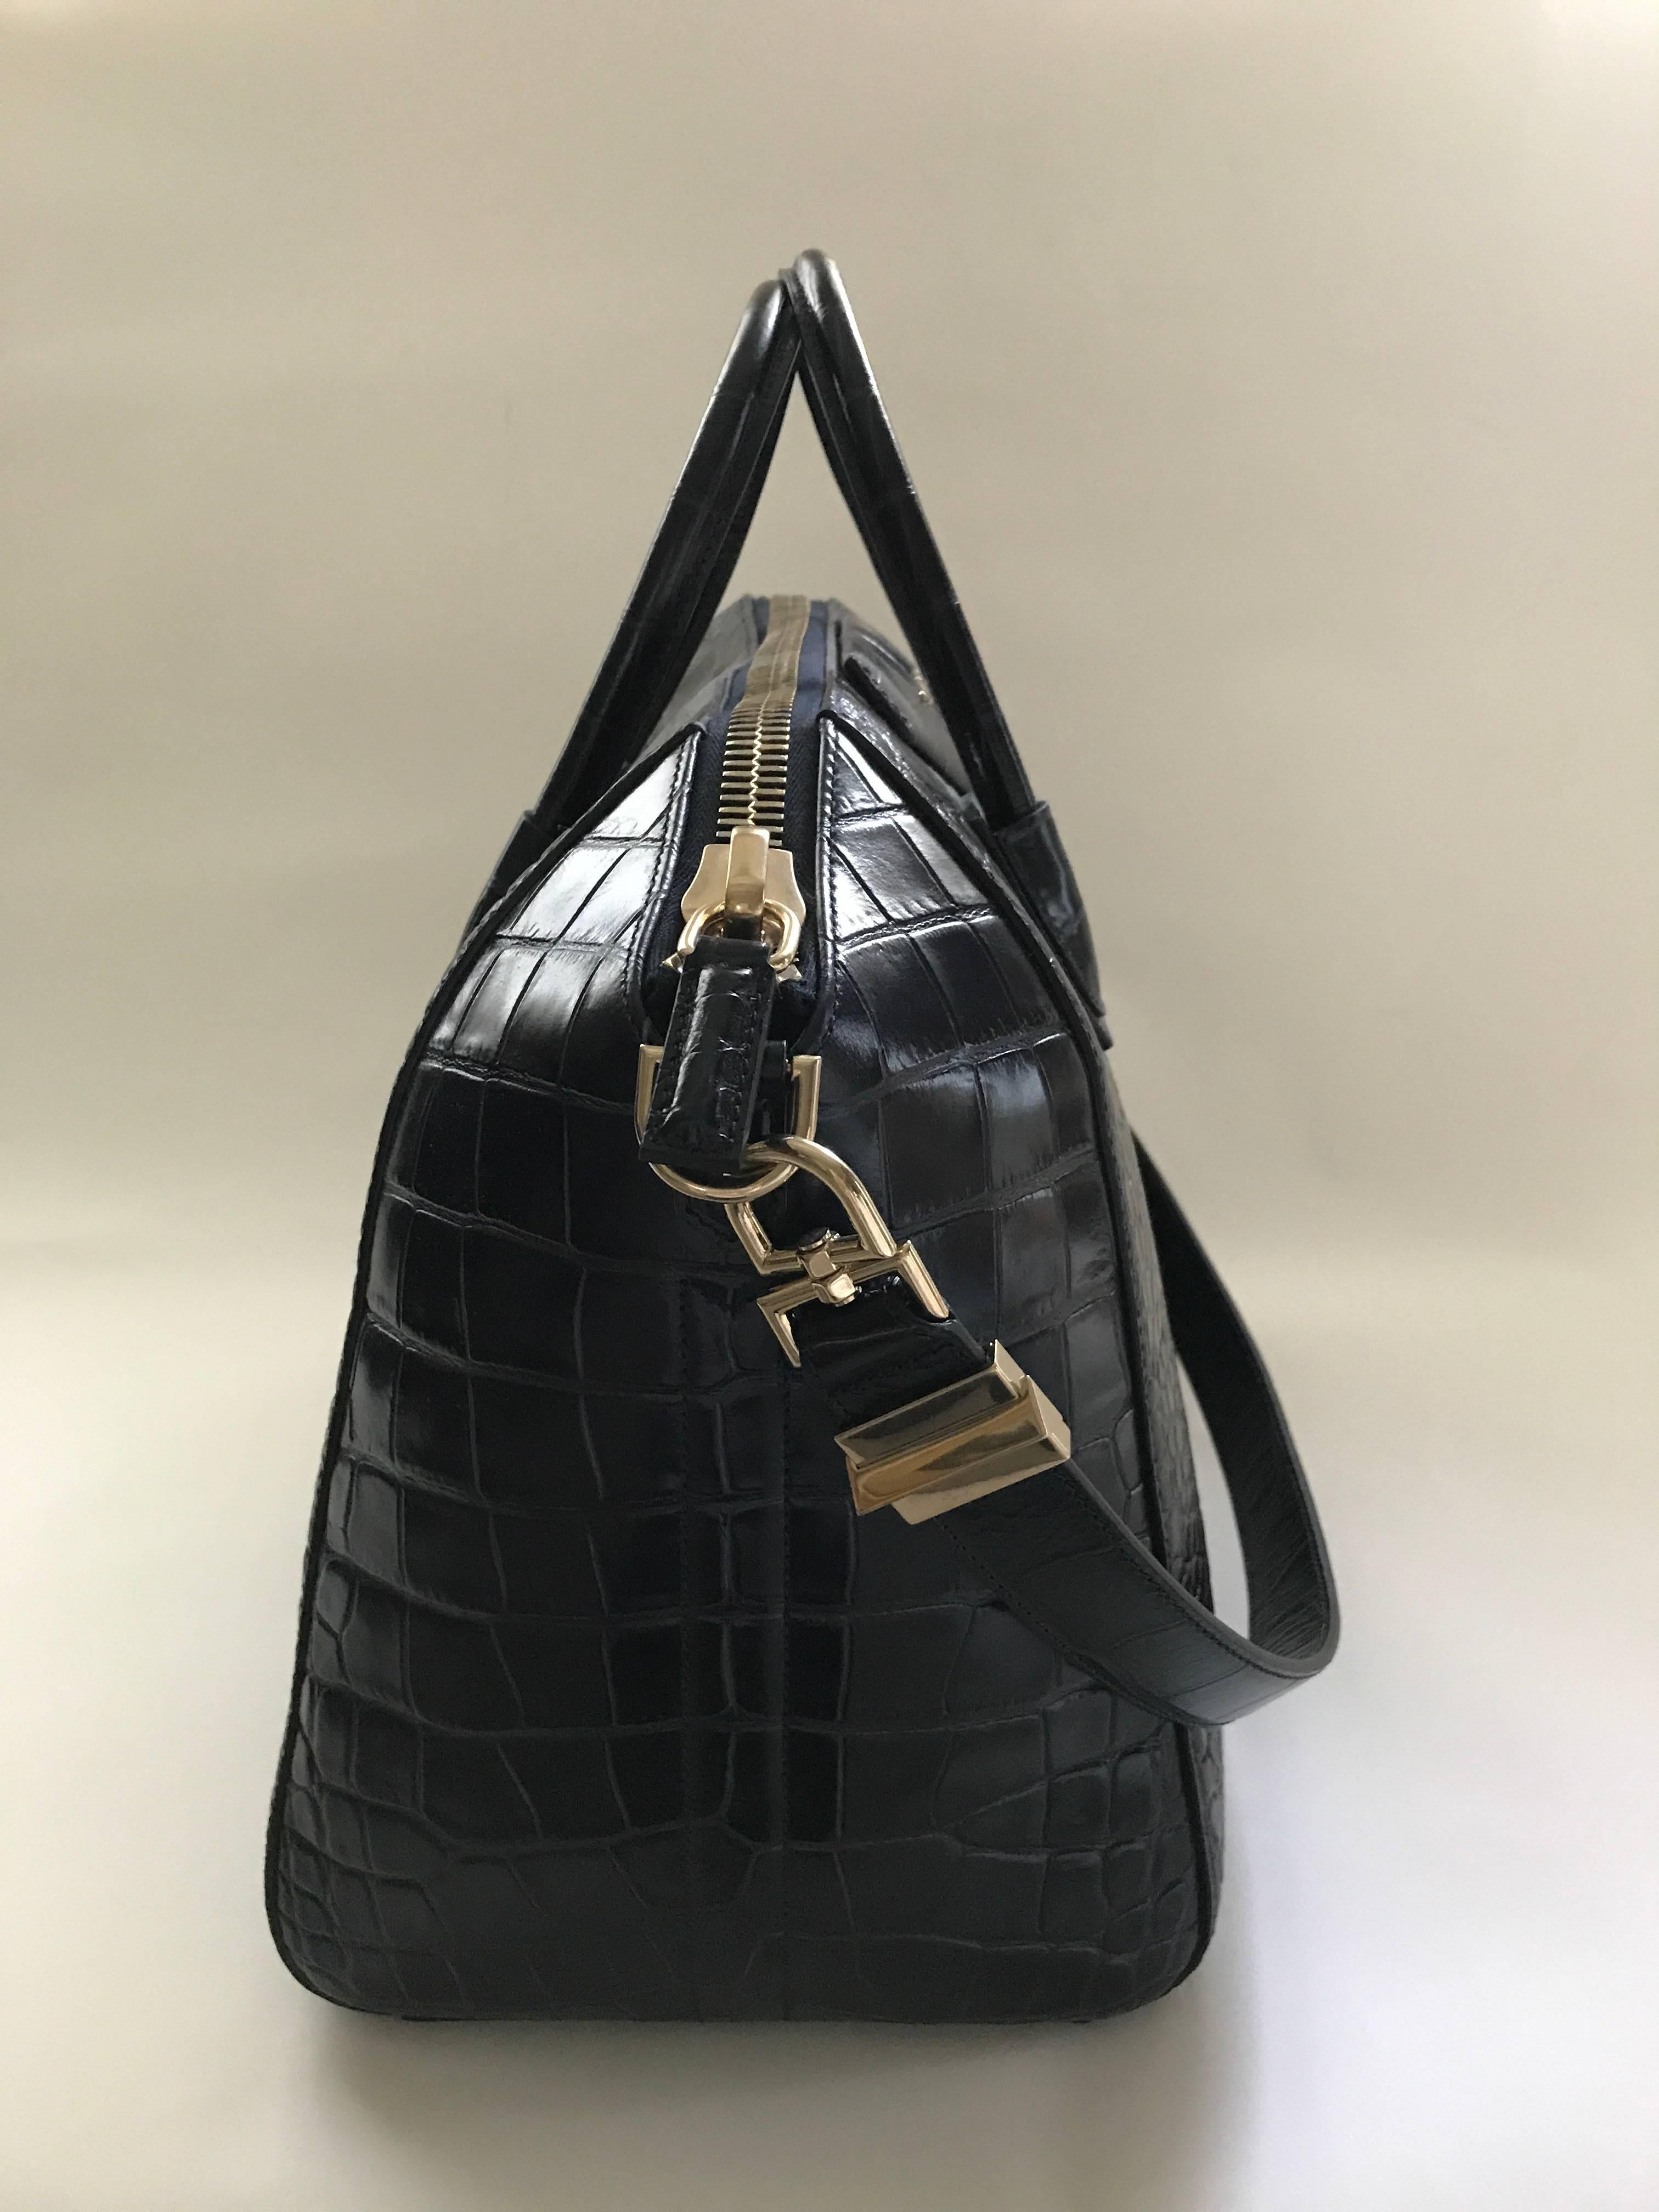 Givenchy large midnight blue Antigona bag in mock croc calf leather. Muted gold hardware, two top handles and a 29in x 1in shoulder strap. Black fabric lining with three wall pockets including a larger one with zipper.
Dimensions: H 12.5in / W 18in 